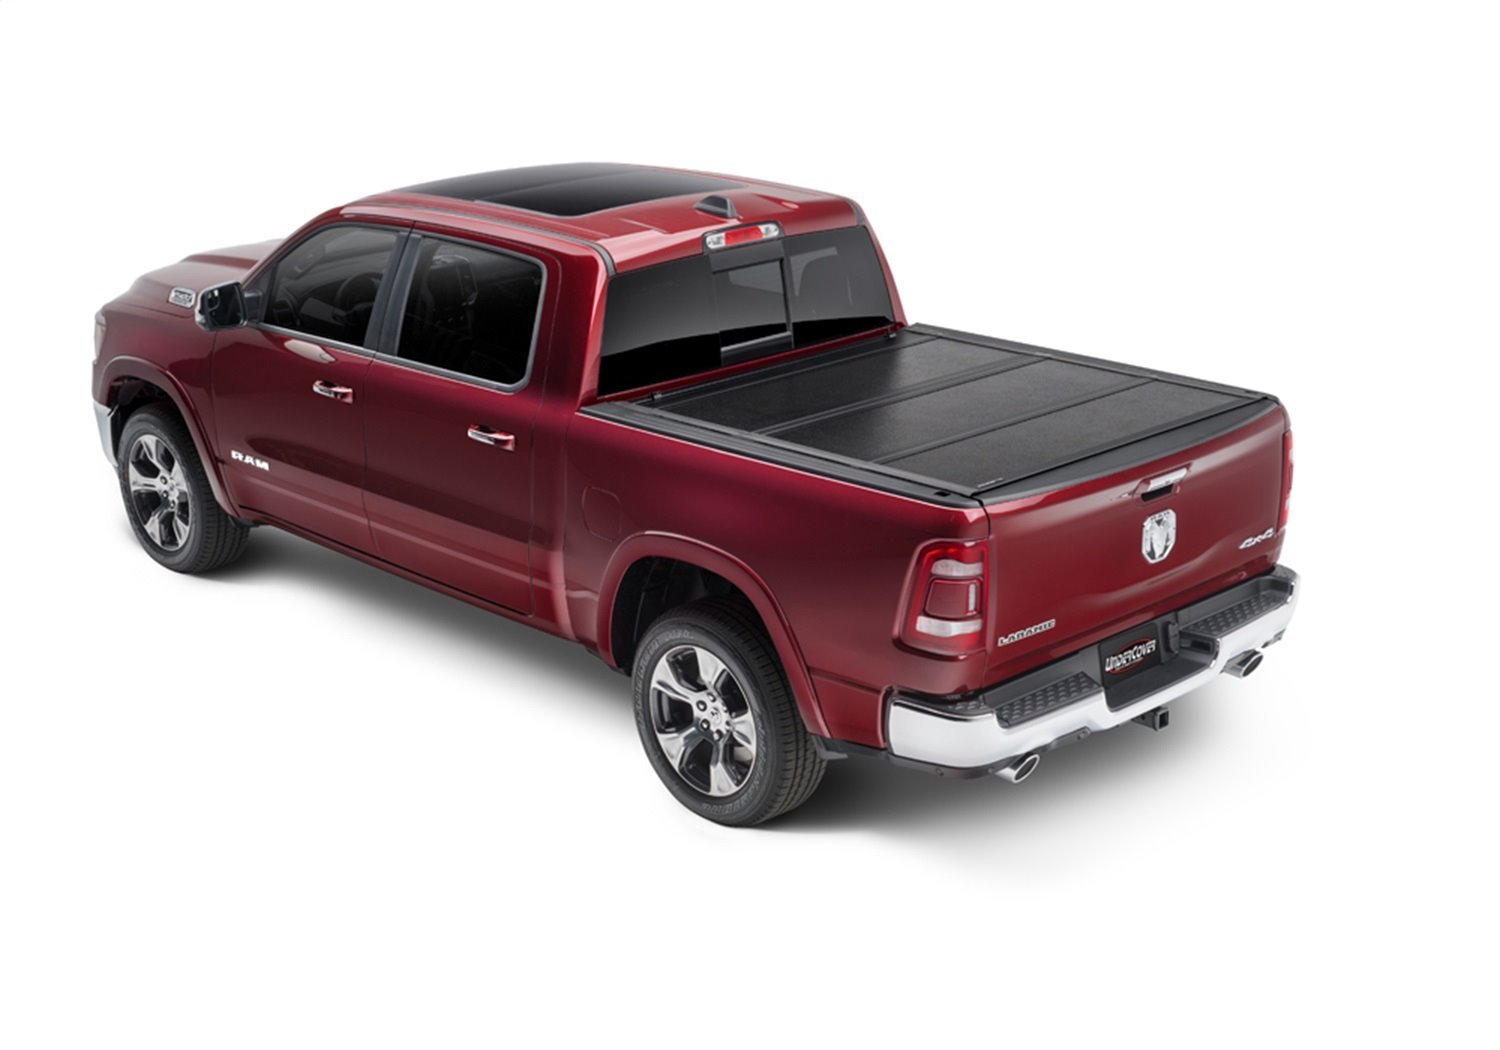 FX31012 Flex Hard Folding Cover, Fits Select Ram 5'7" Bed Crew Cab, w/o RamBox w/ Multifunction Tailgate, Black Textured